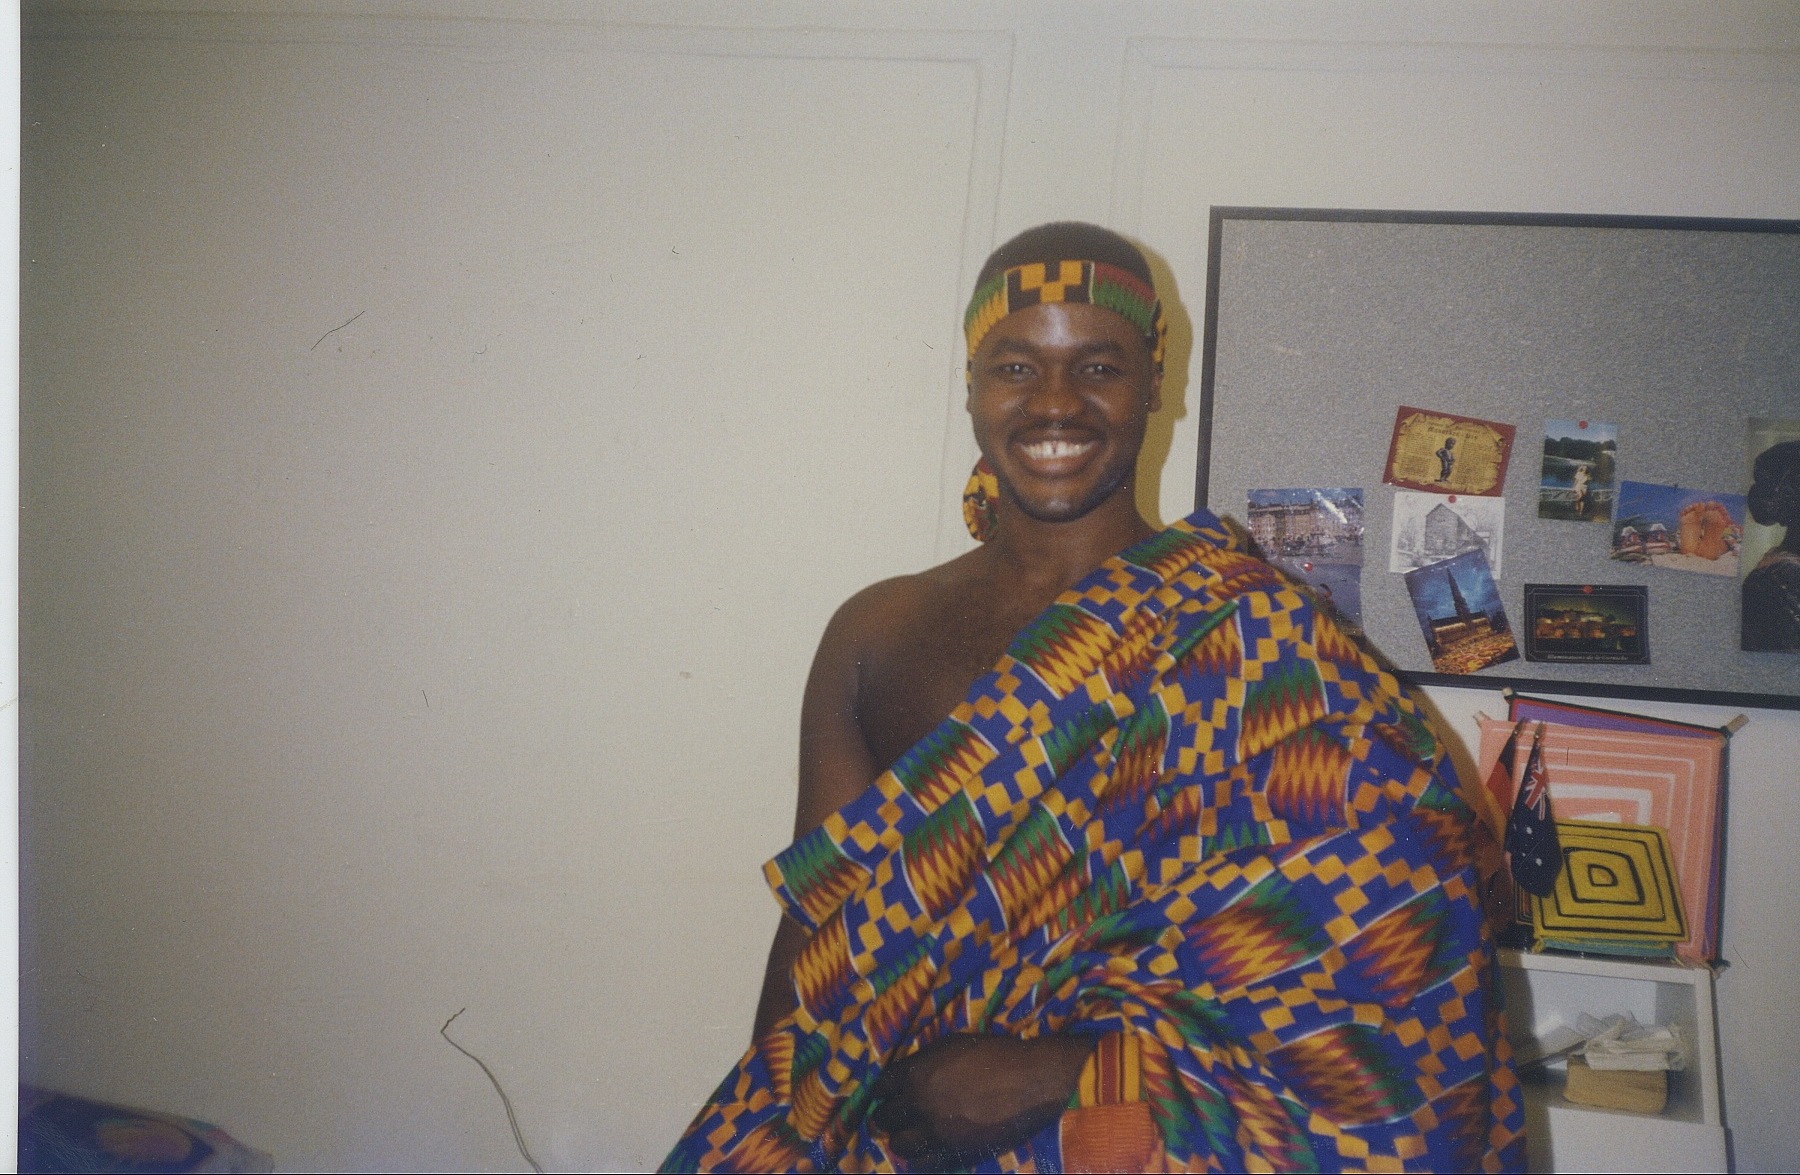   During the 1980s, I wore outfits made of kente cloth either for fun or for special occasions. I didn't make it a habit considering the constant Africa-related jokes I had to tolerate while growing up in West Harlem.  